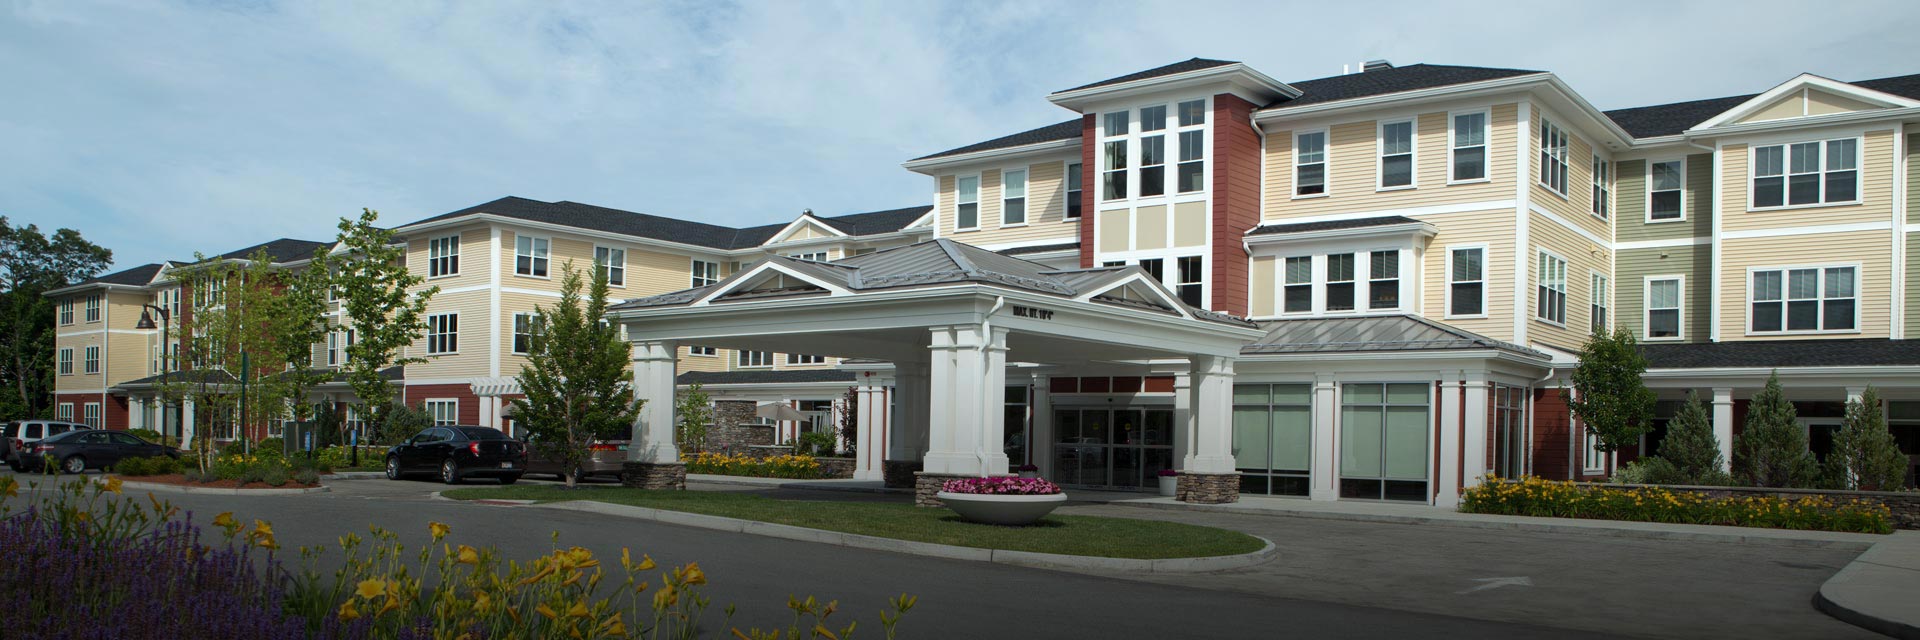 Wingate Residences at Needham - assisted living and memory care